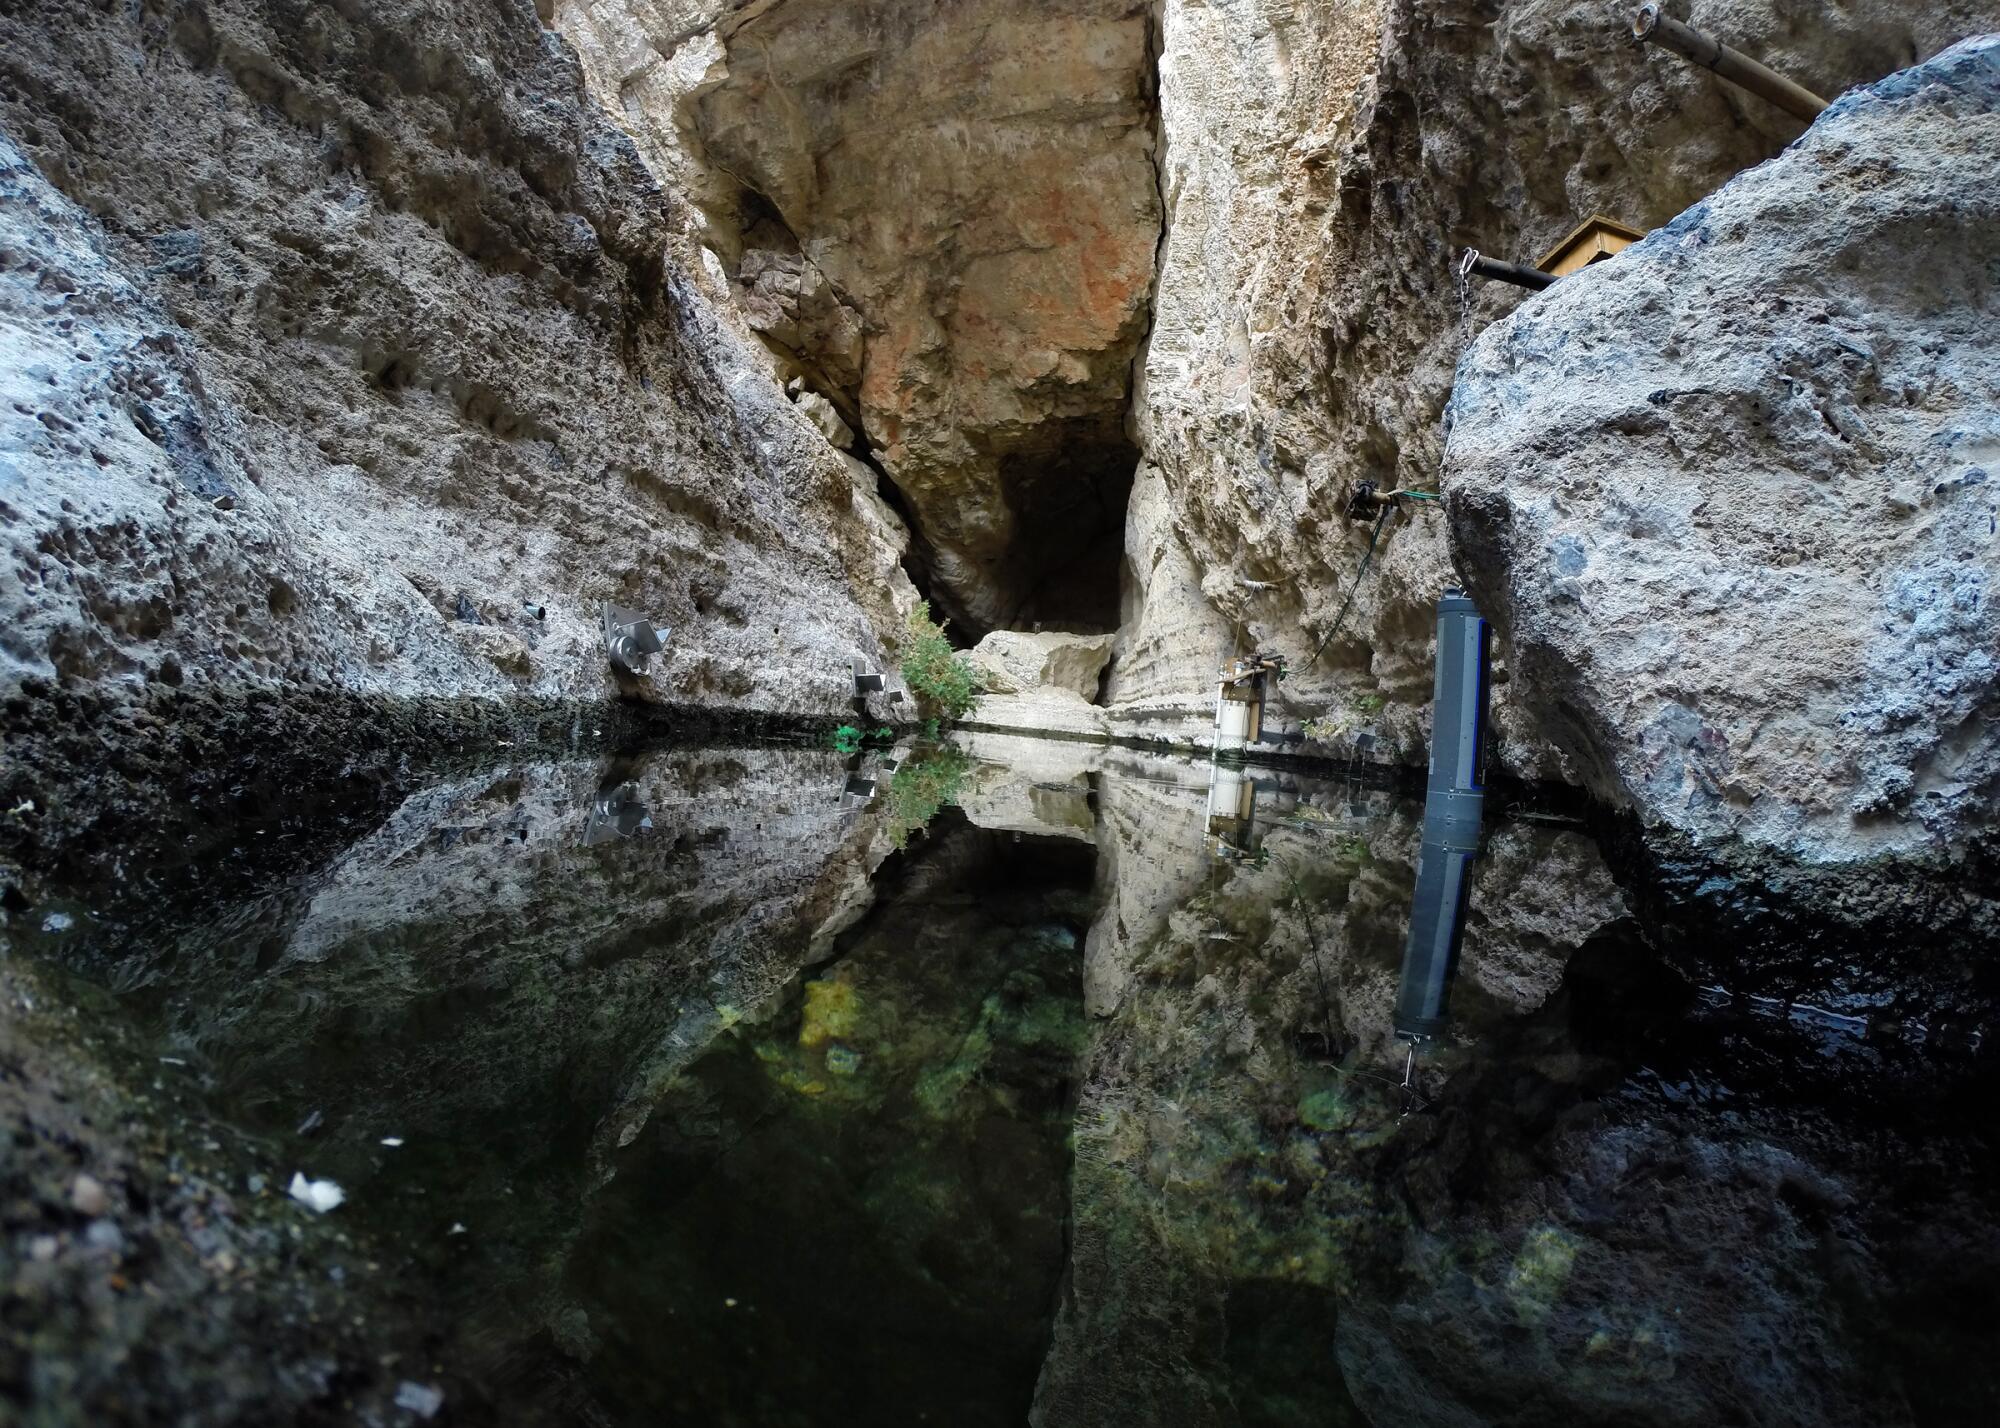 The Devil's Hole pupfish has survived in this remote rock tub since the Ice Age